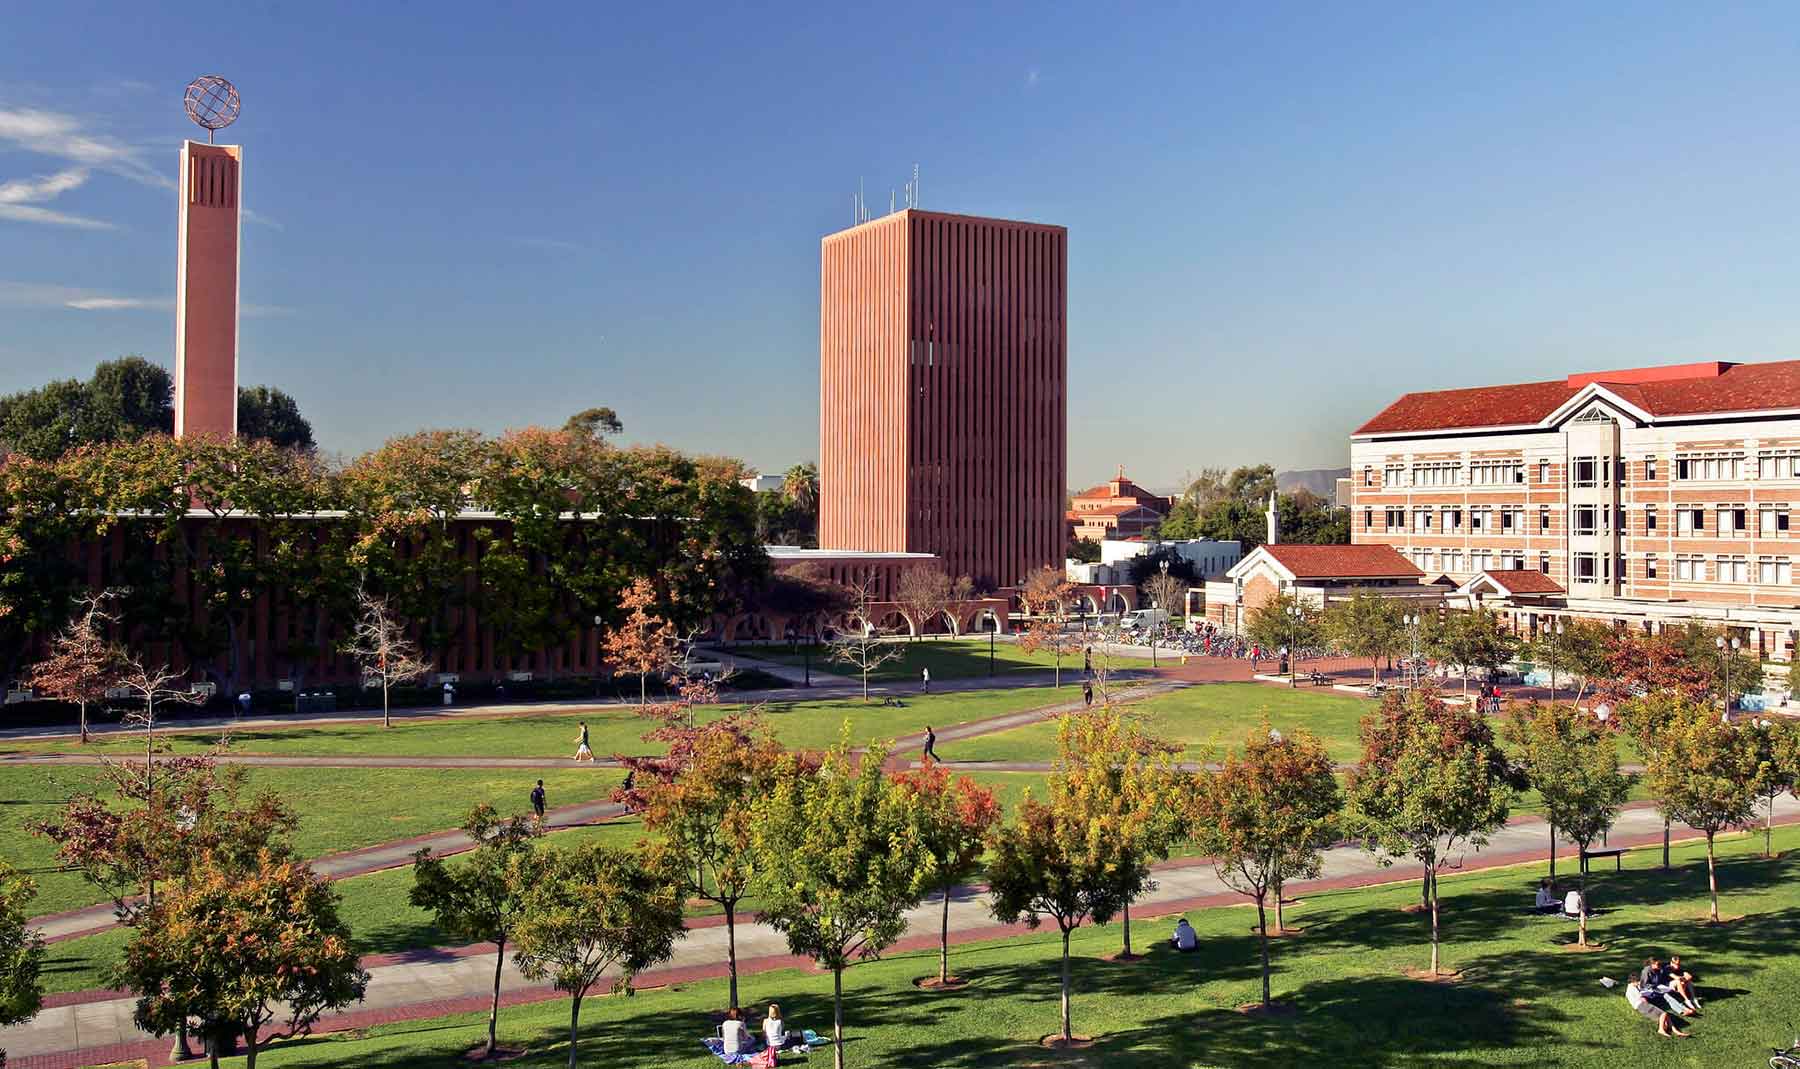 scenic view of USC's McCarthy Quad, with Leavy Library on the right and the red brick towers of the Rossier School and the Dr. Joseph Medicine Crow building in the background